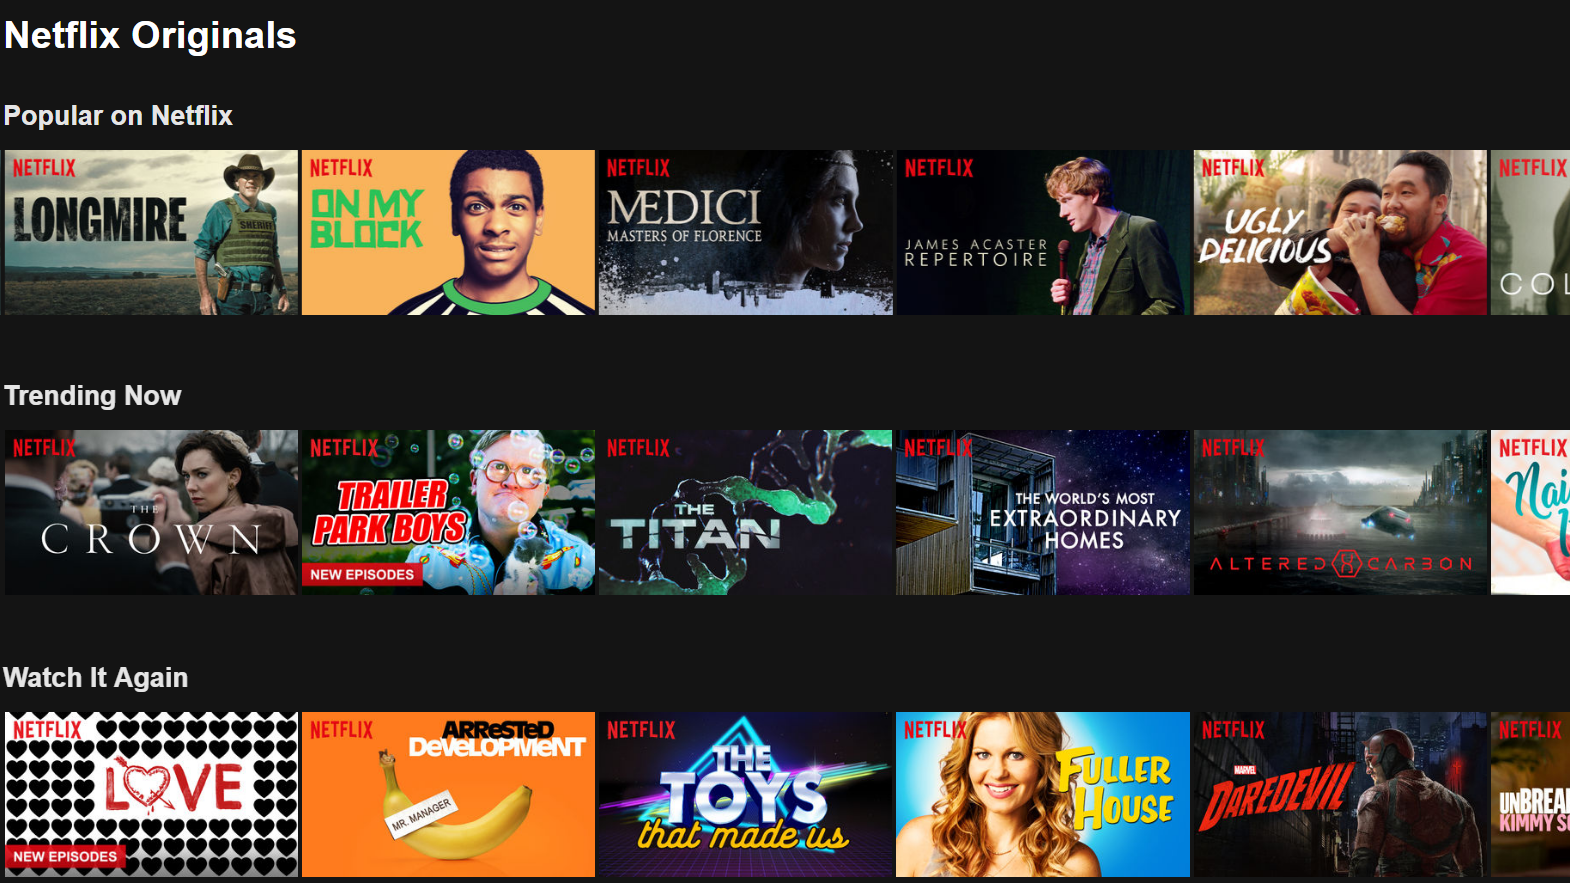 why has the netflix font changed